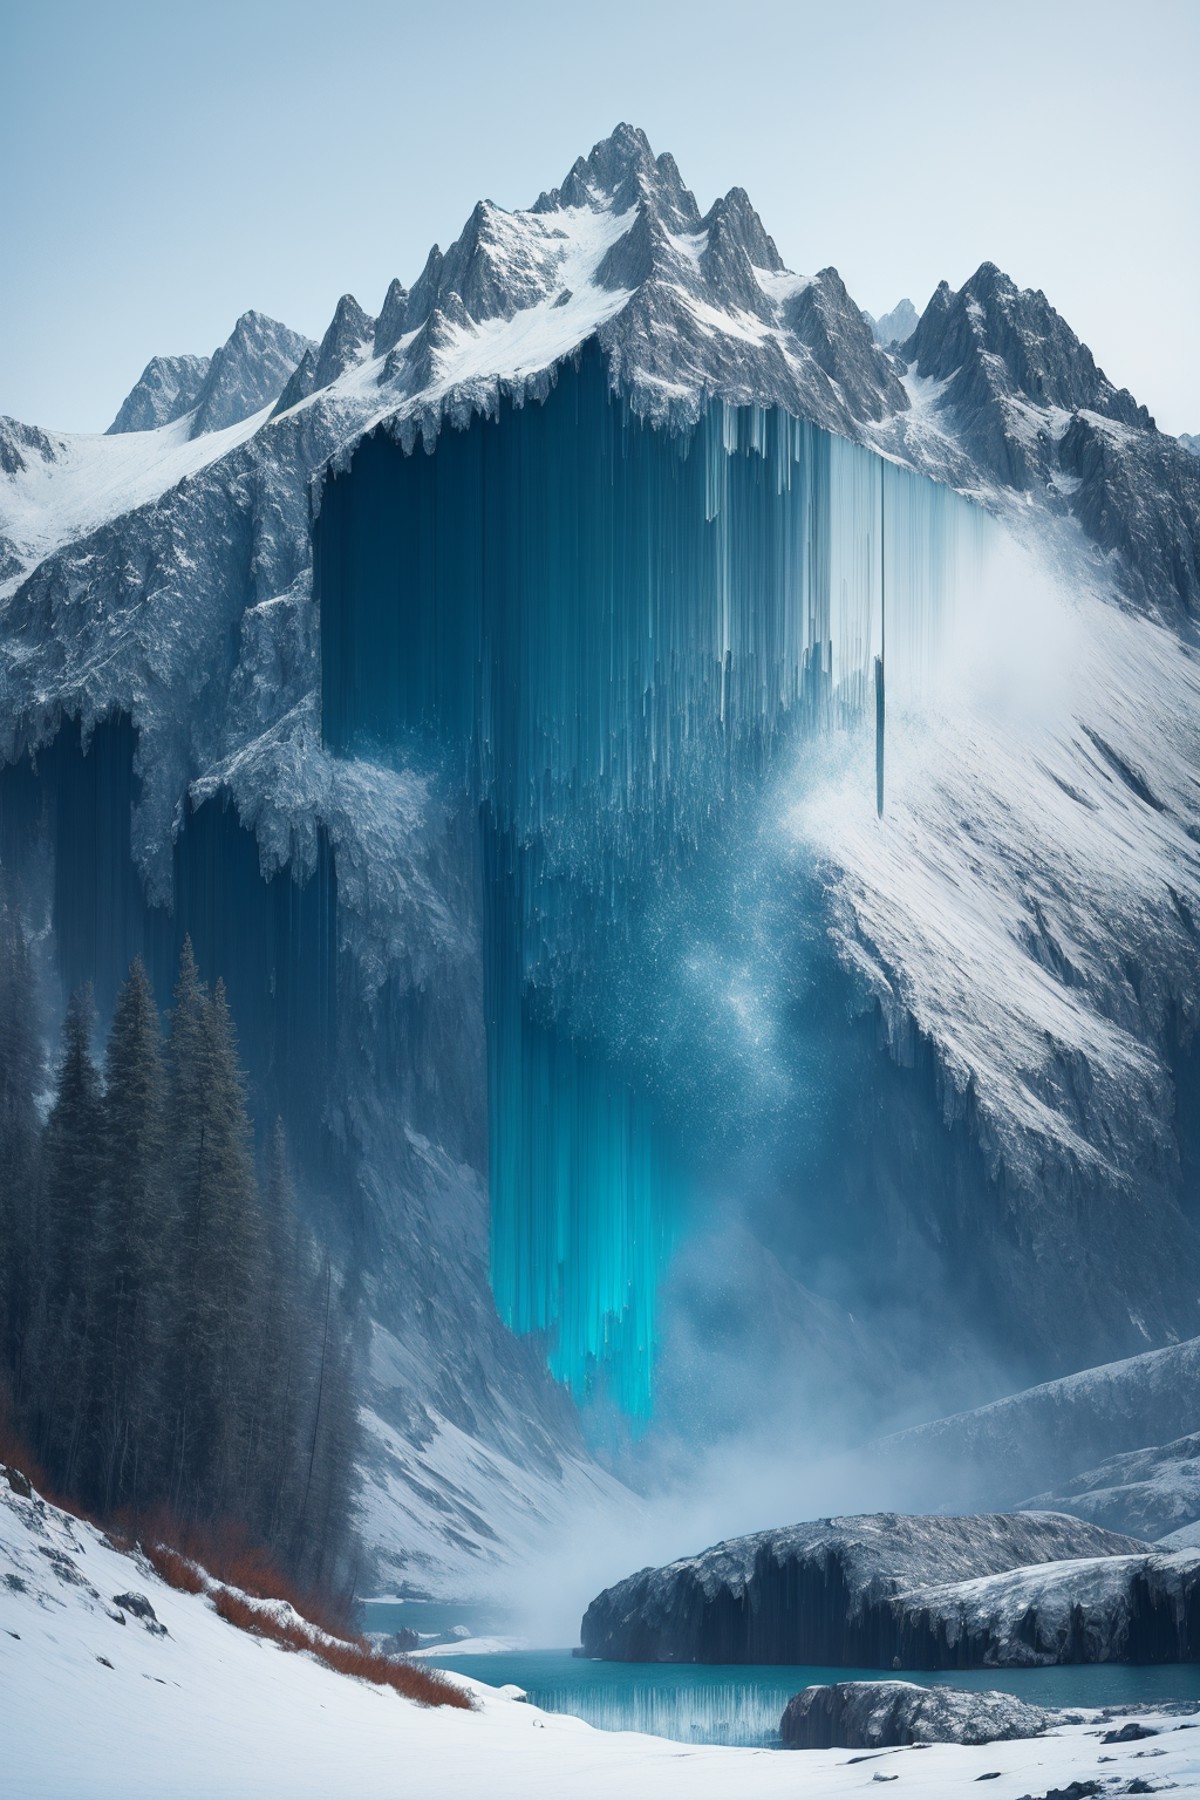 00723-2033814647-1736-pixel sorting, high snowy mountain stiff cliff.png